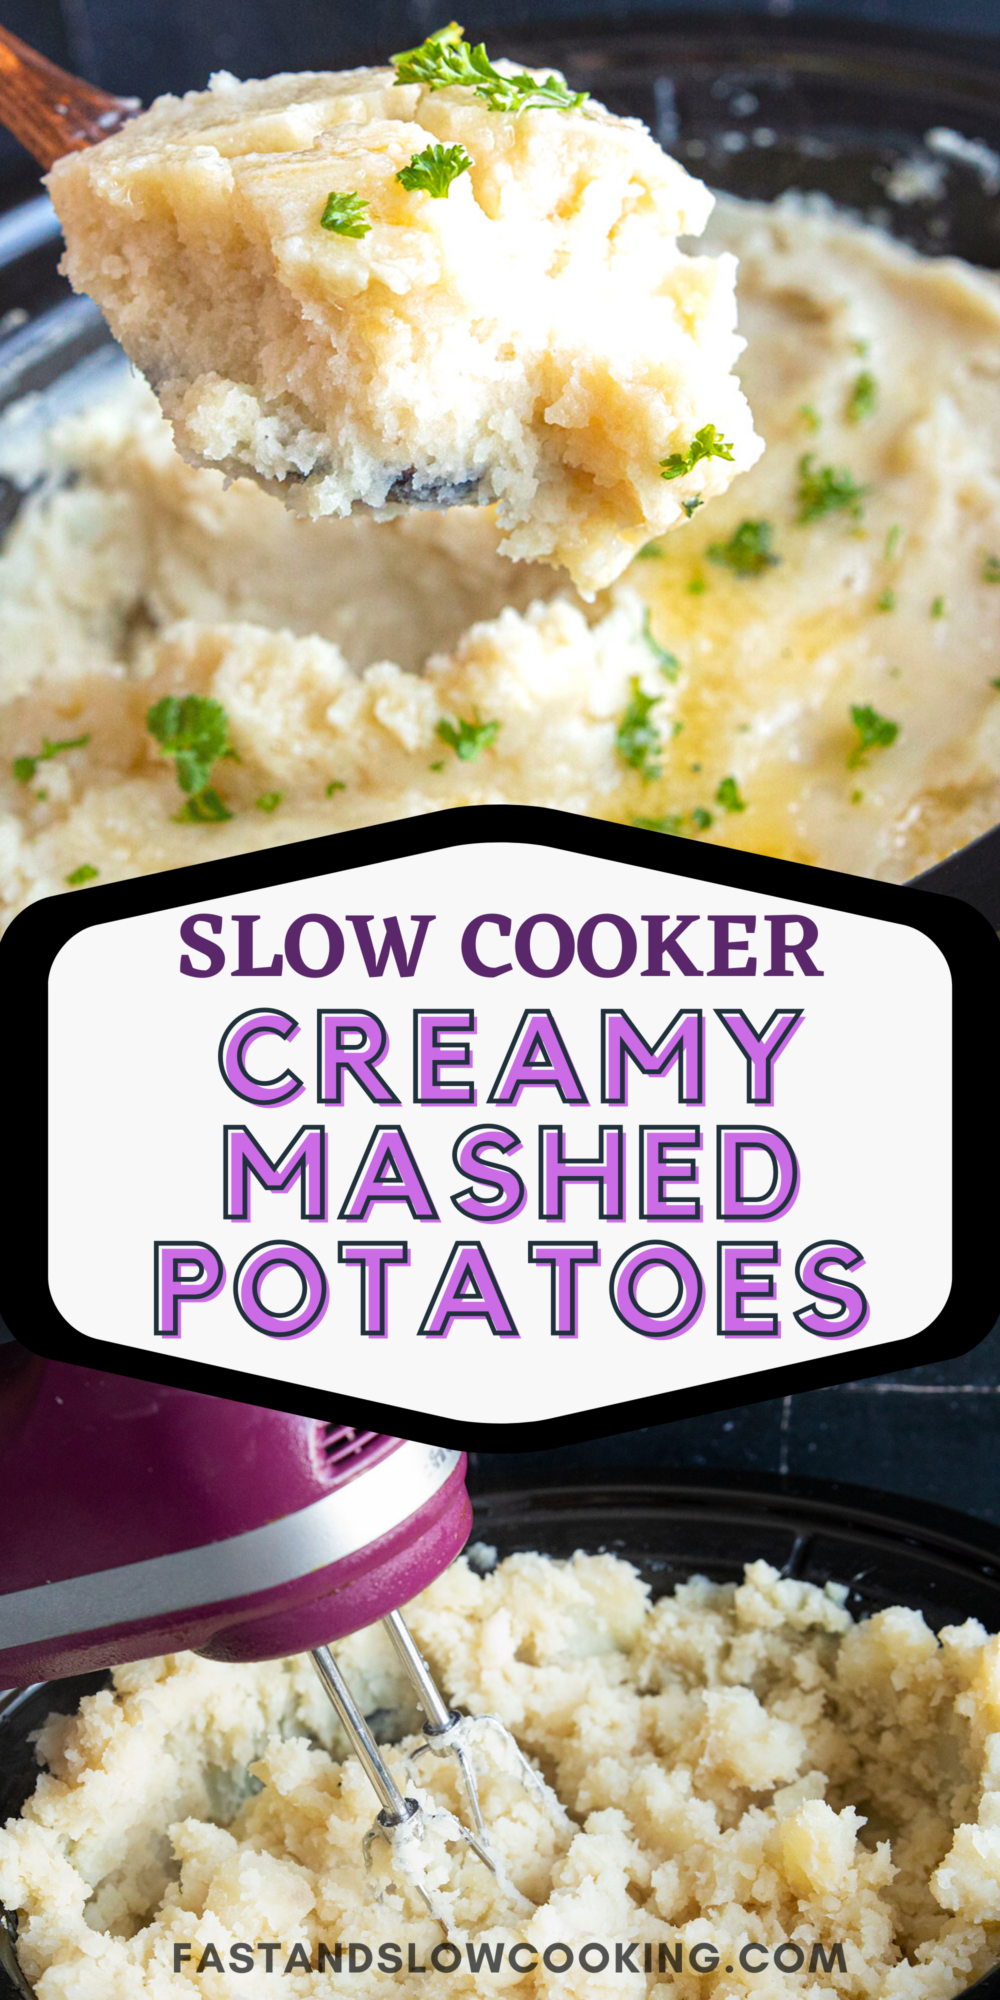 Creamy, buttery mashed potatoes that you make and mash right in the slow cooker! Perfect for those days when you need to save stove space!